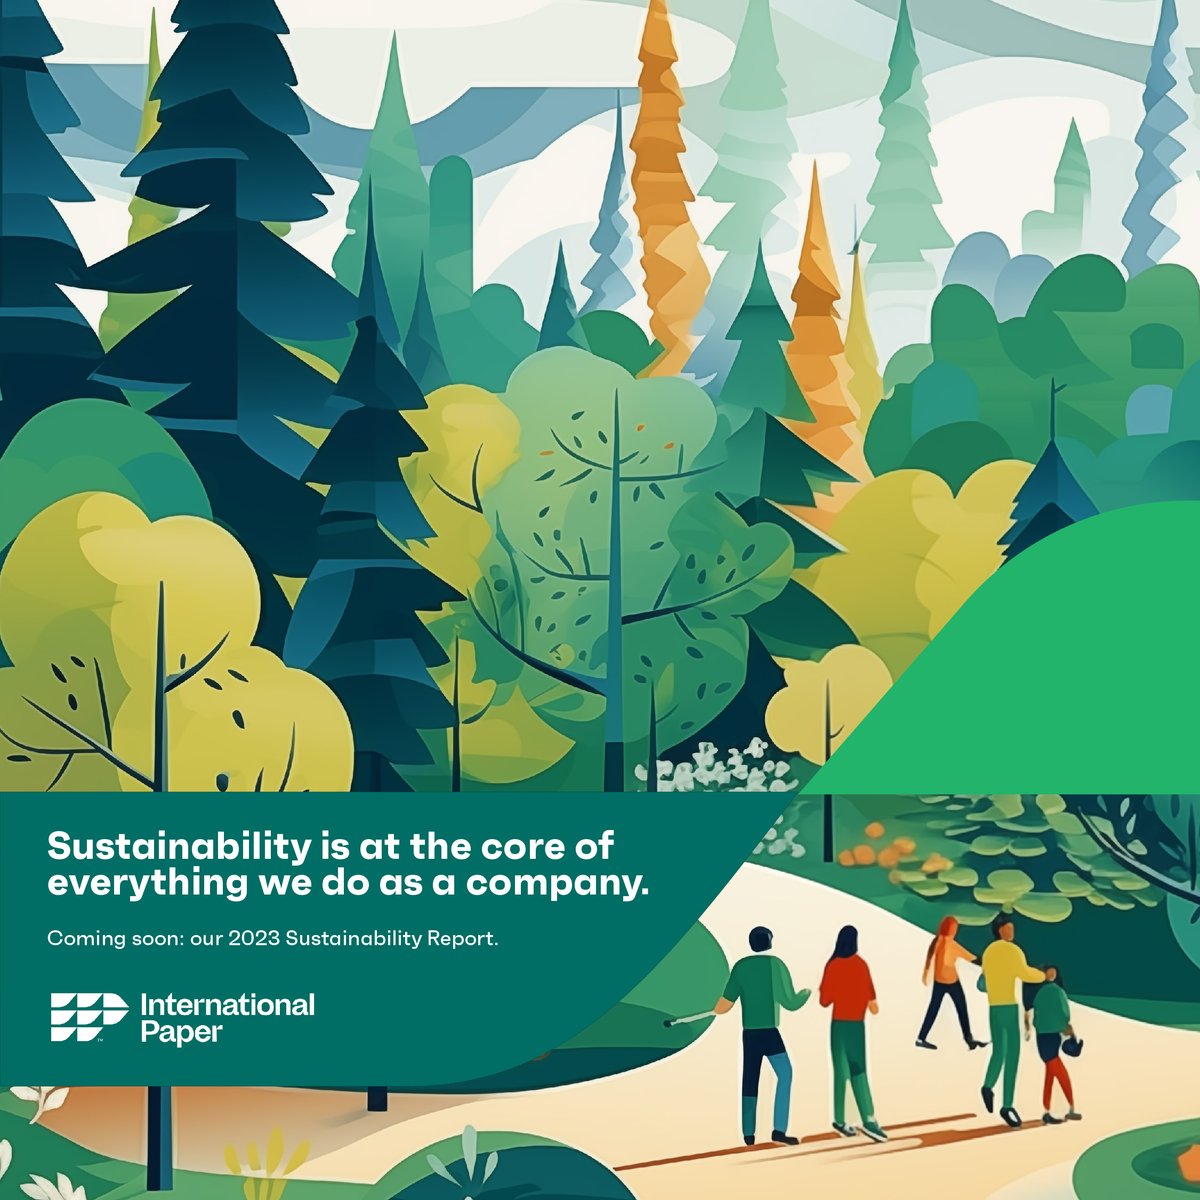 Coming soon: our 2023 Sustainability Report, which illustrates the progress we’ve made on our #Vision2030 goals and outlines our commitment to building a better future for people, the planet and our company.